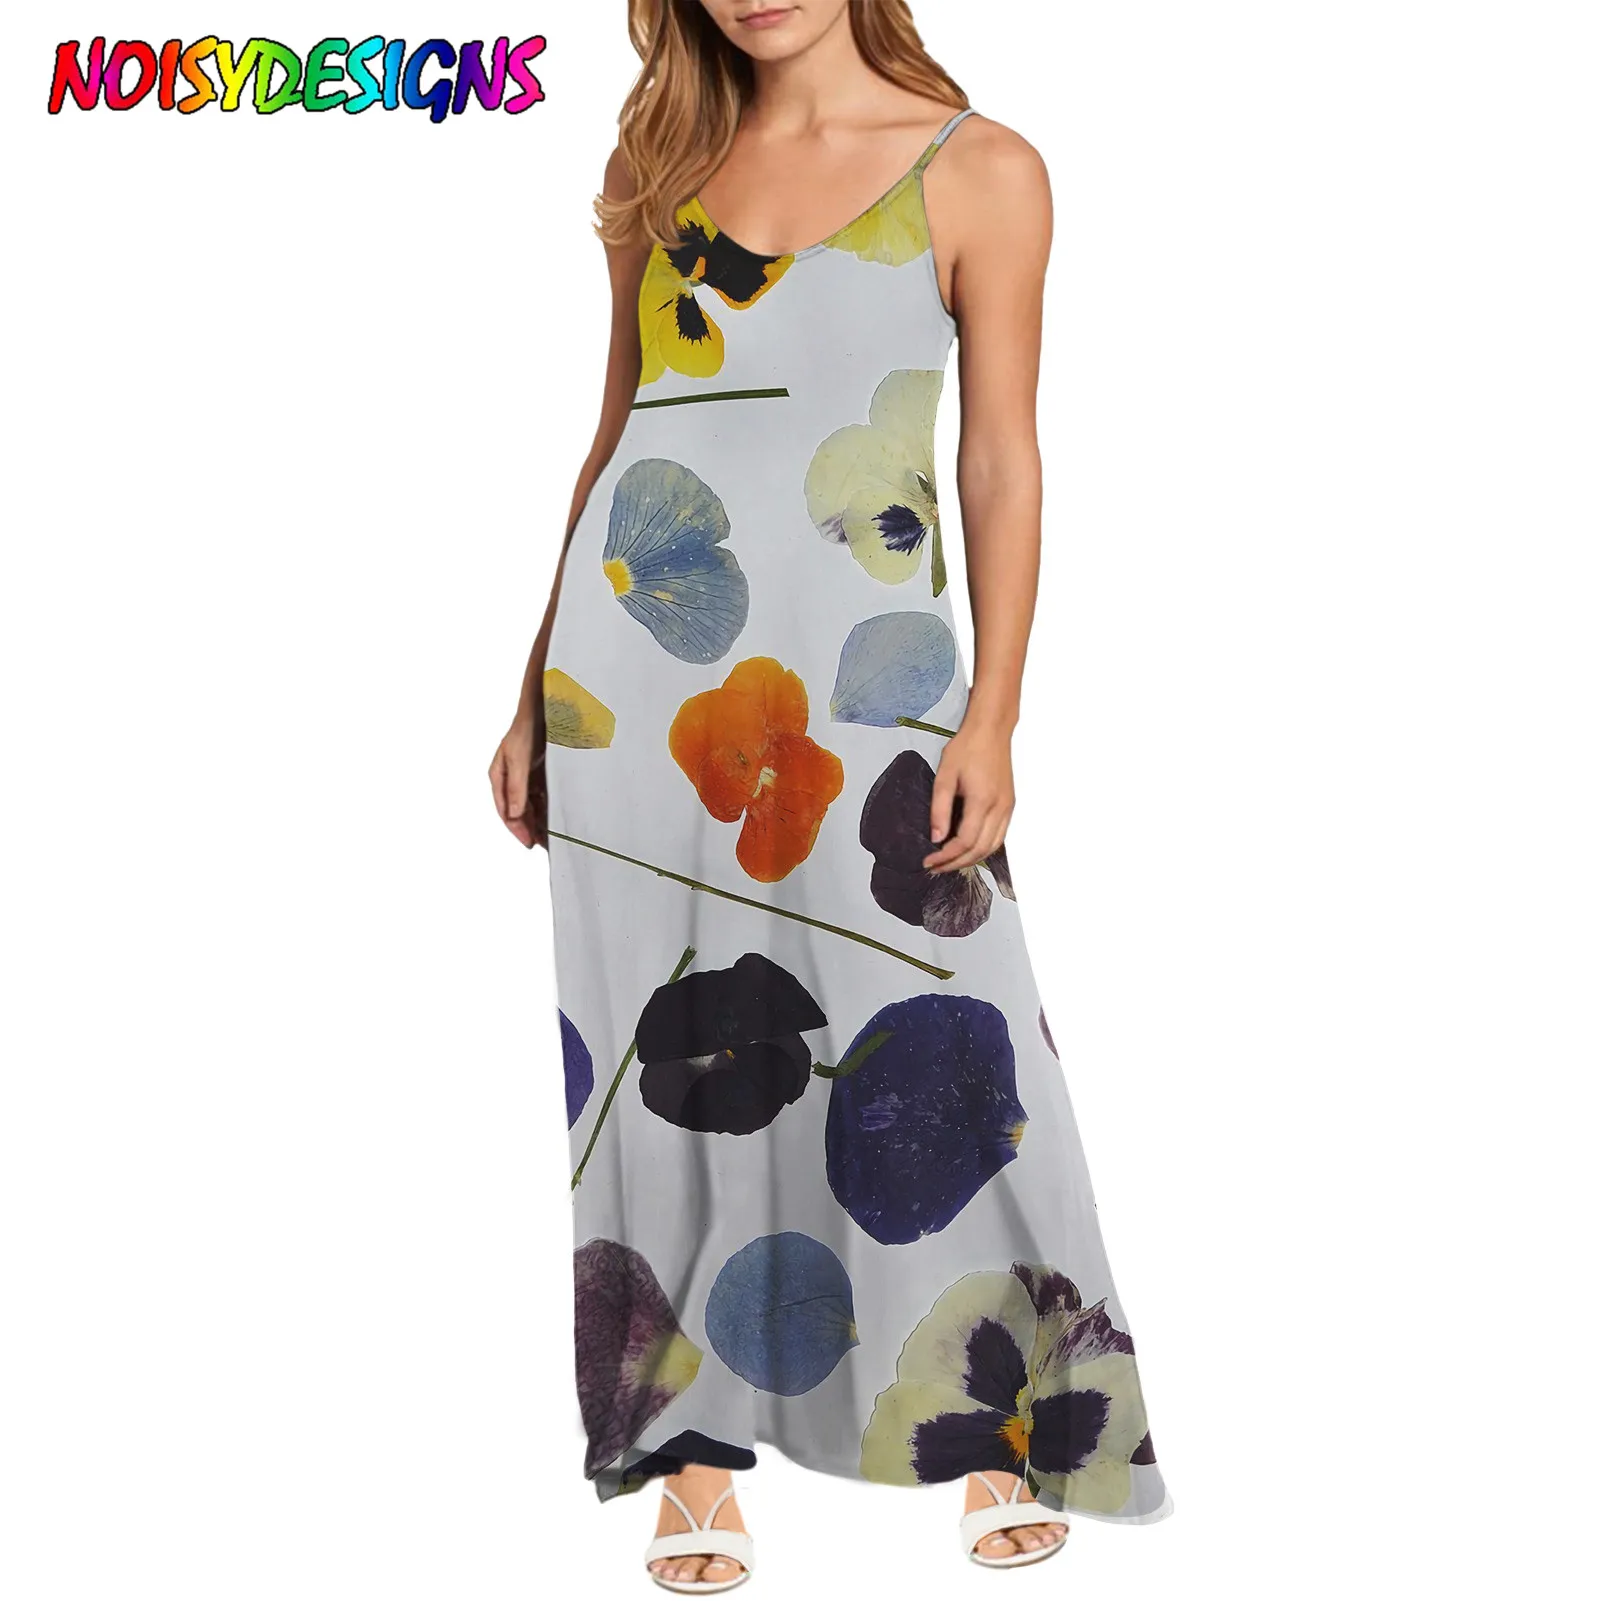 NOISYDESIGNS Summer Fashion Versatile Women's New Sling Sleeveless Color Pansy Flowers Printed Dresses for Women Dropshipping